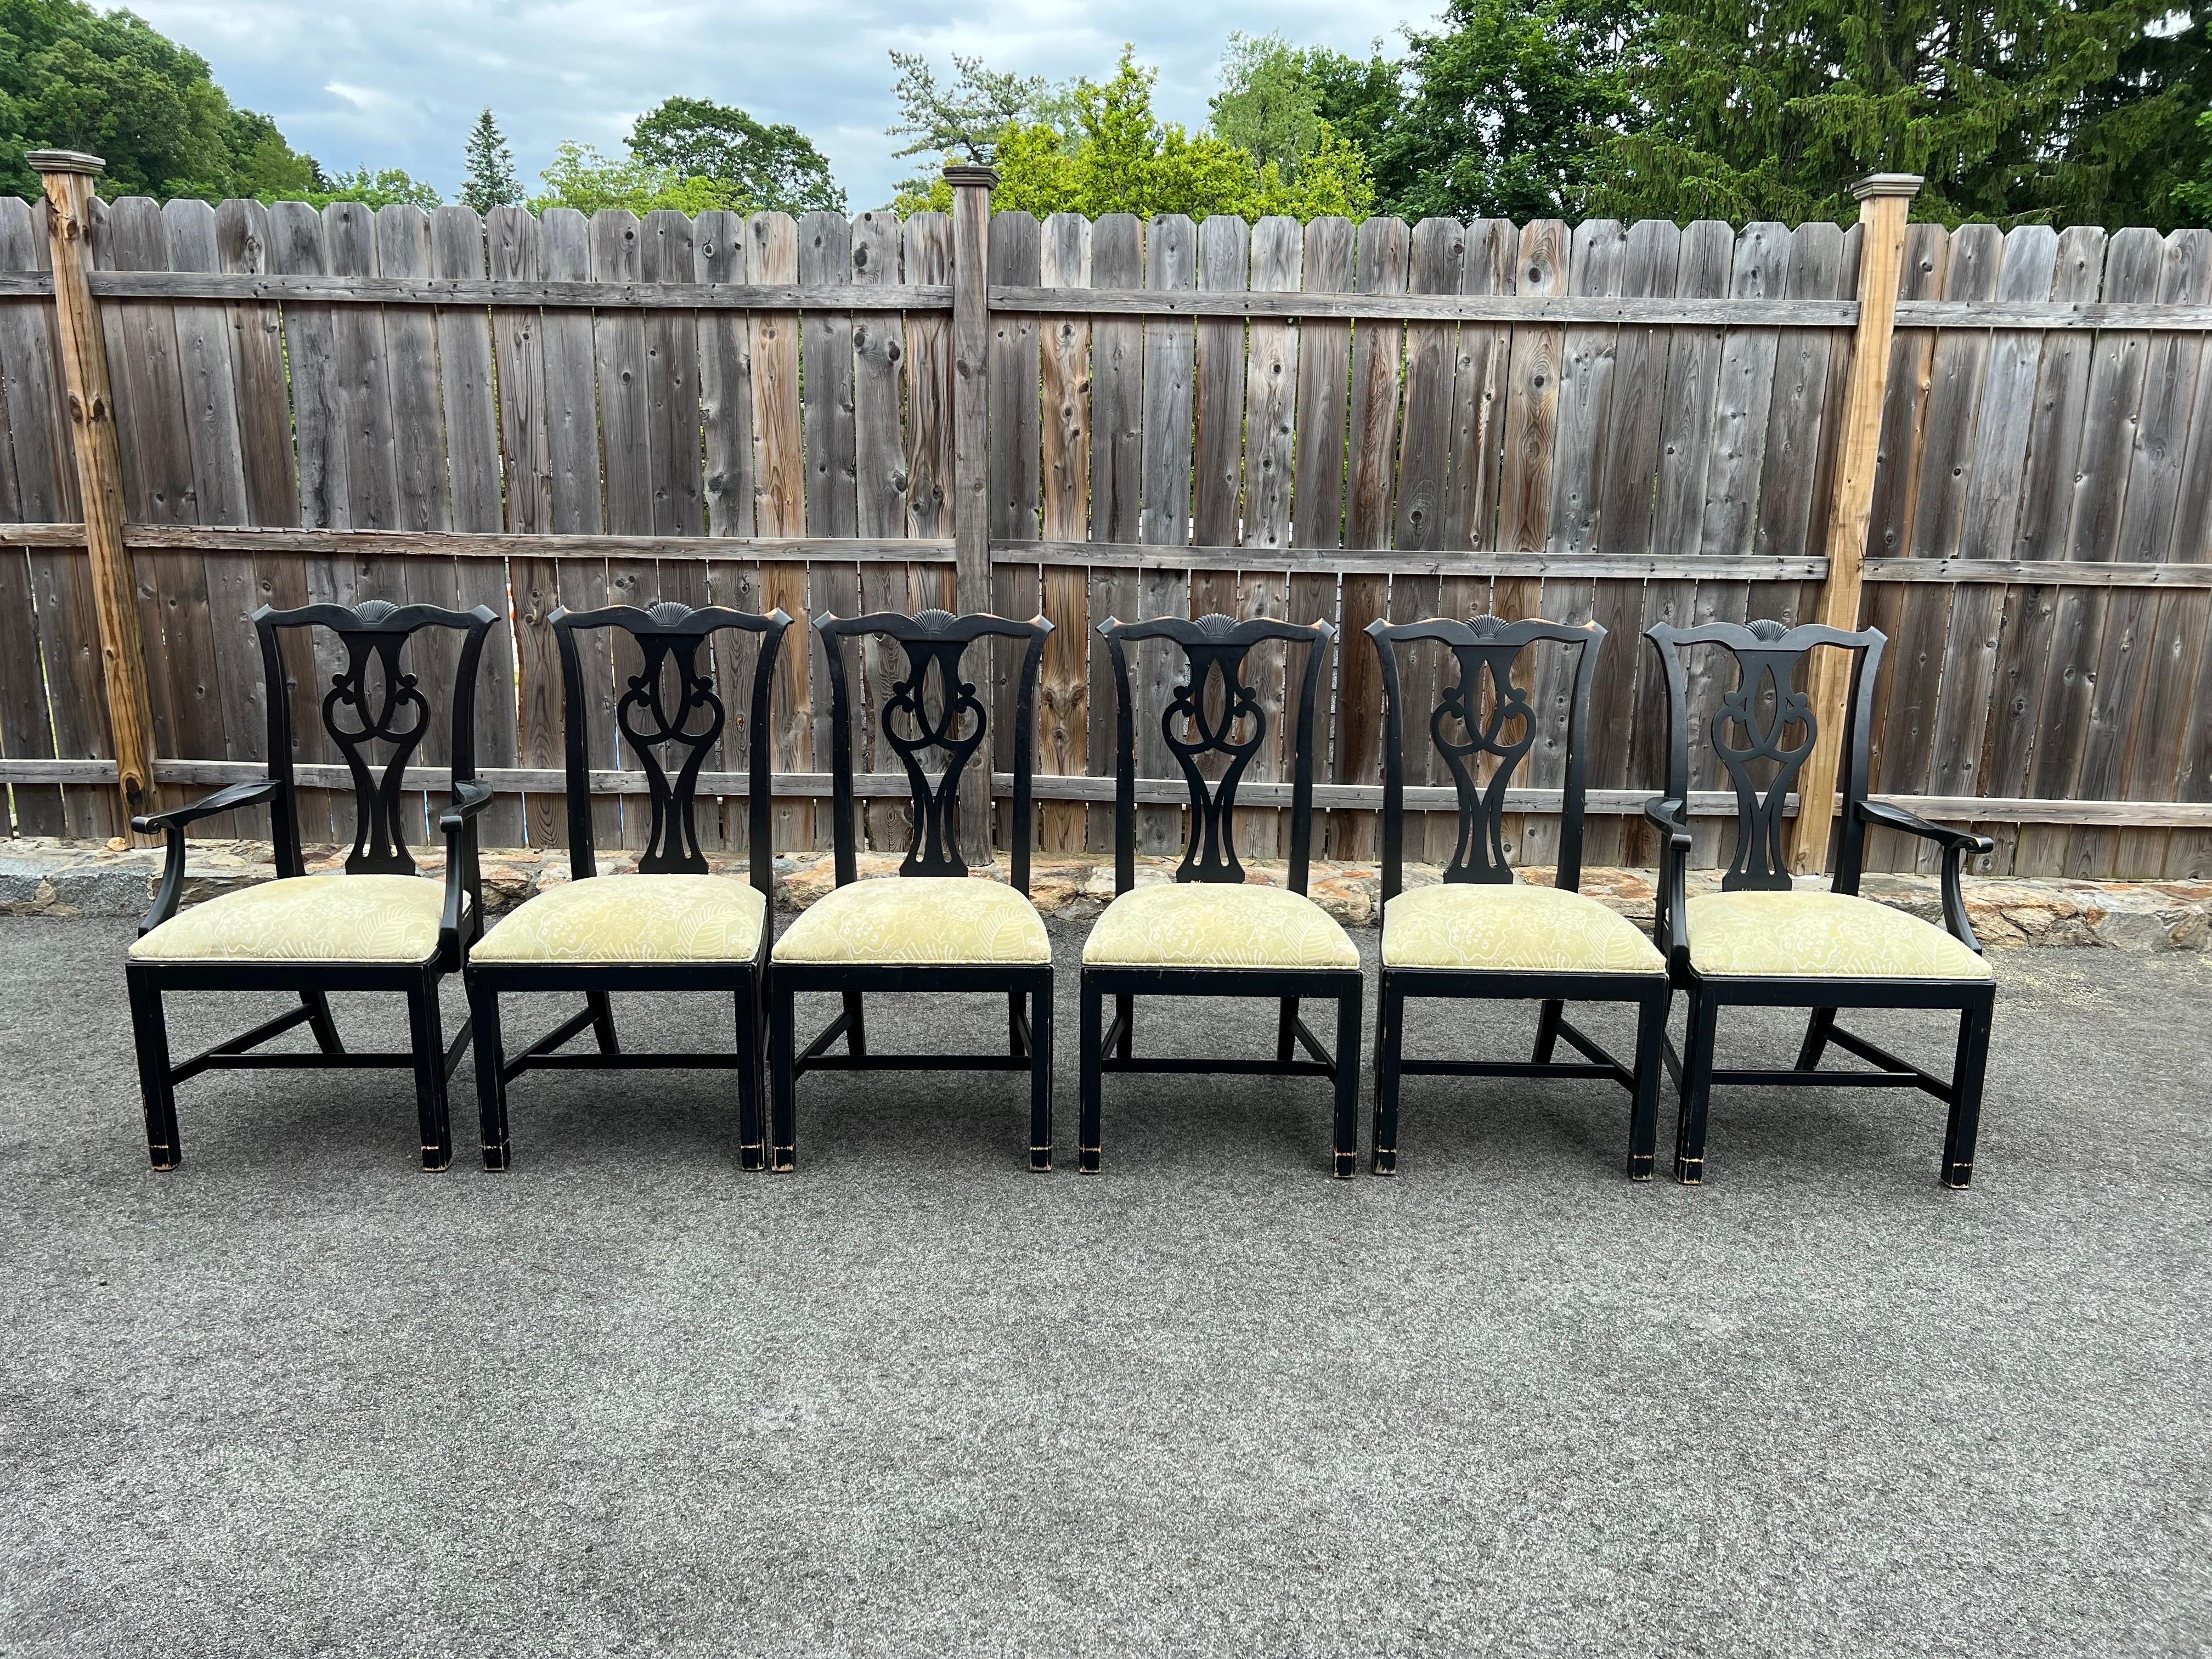 Set of Six Chippendale Dining Chairs in Black. Intentional distressed finish in a Chippendale carved back style. . Two arm chairs and four side chairs. Upholstered seats are in a pale sage green and white. Perfect for that country farmhouse. Recover